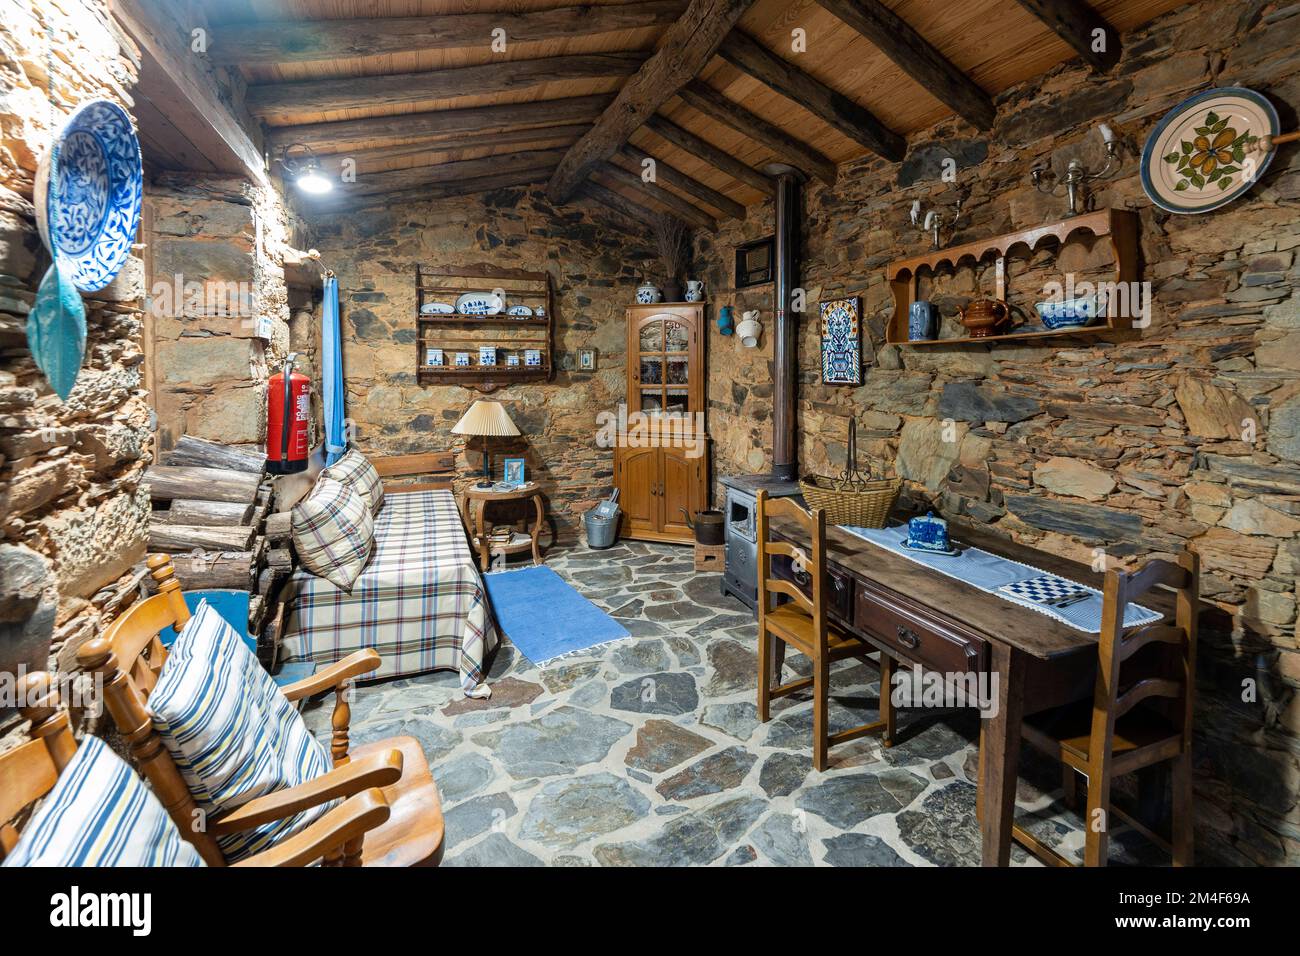 Living room in old style retro house with schist walls in a village in Portugal, Europe Stock Photo